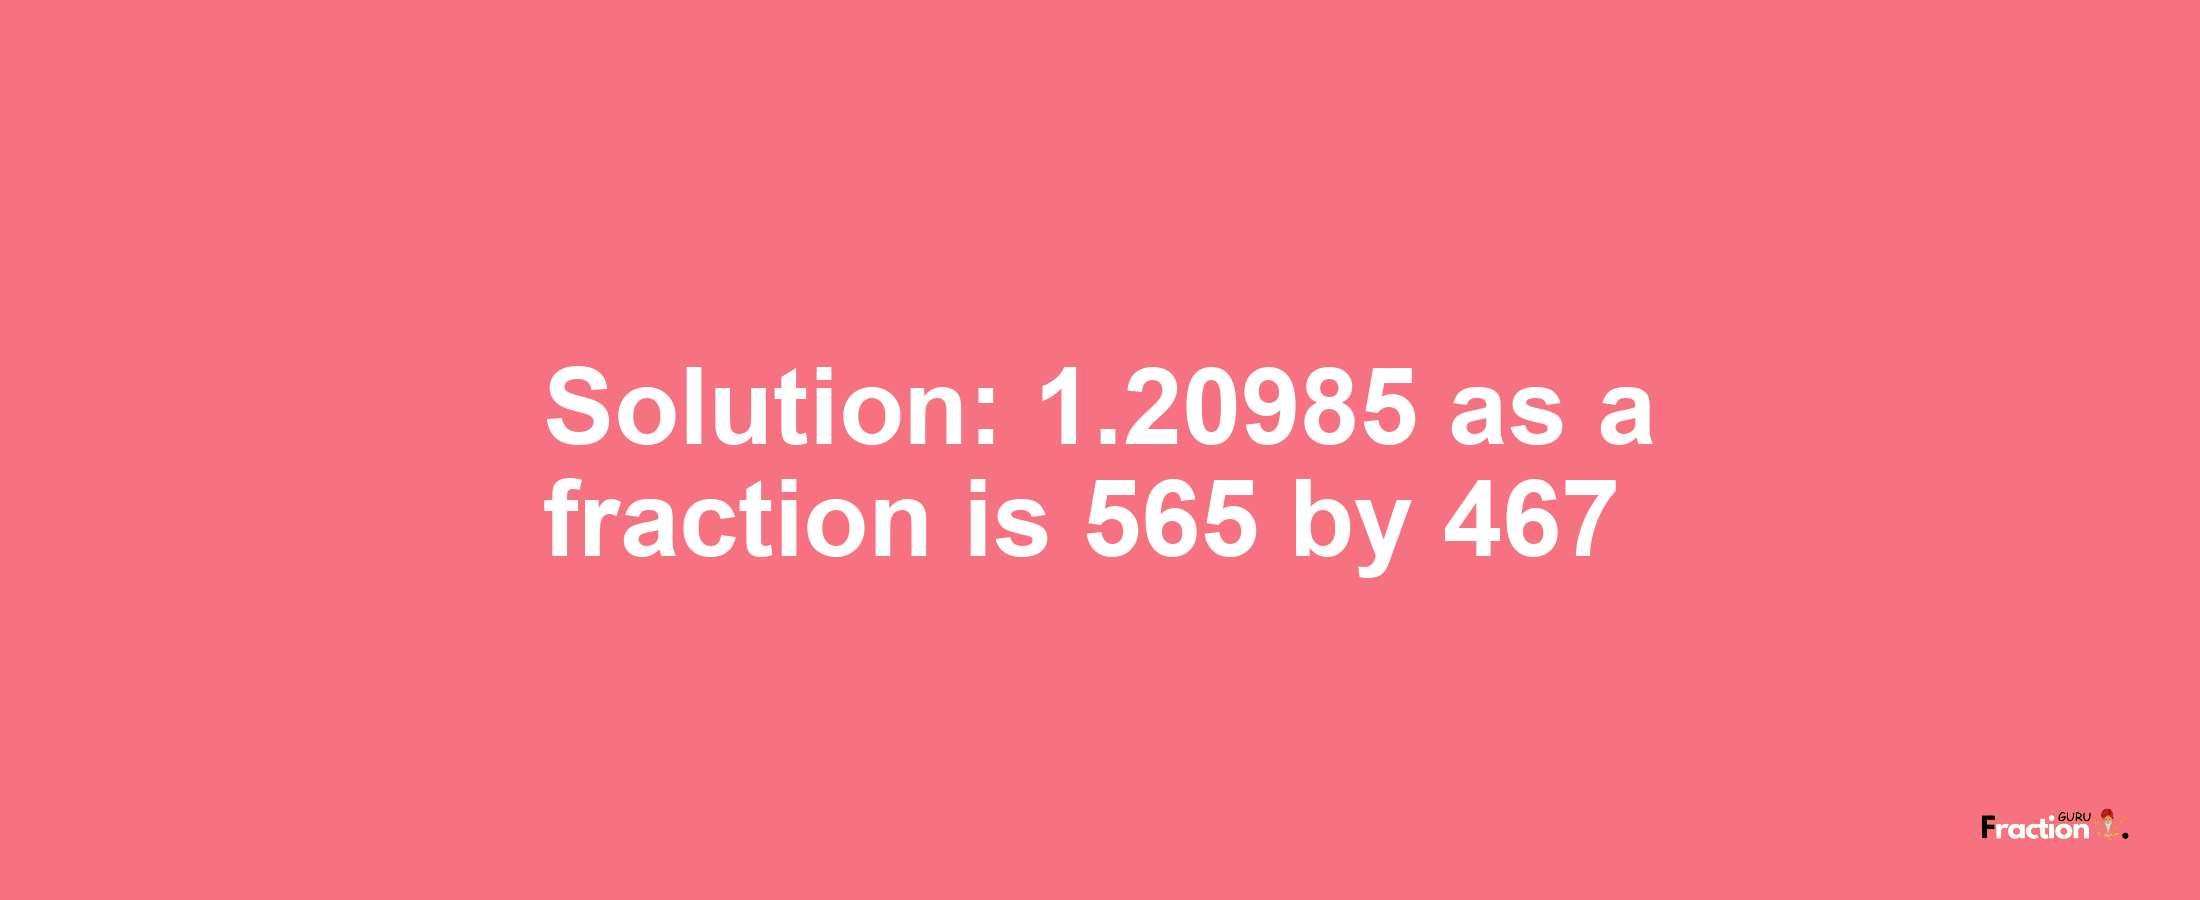 Solution:1.20985 as a fraction is 565/467